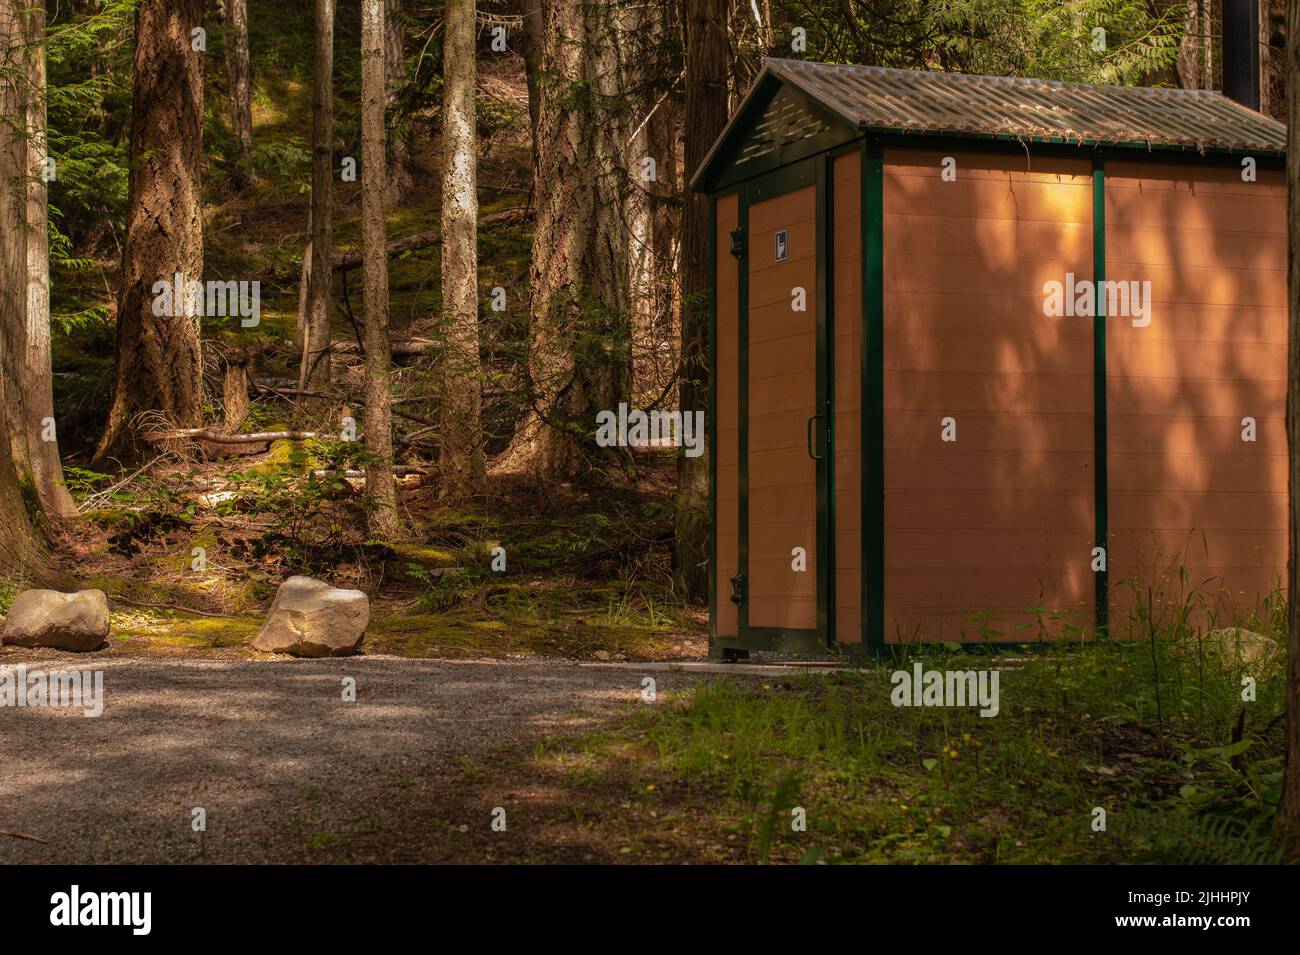 Outhouses at Prior Centennial Campground, North Pender Island Stock Photo